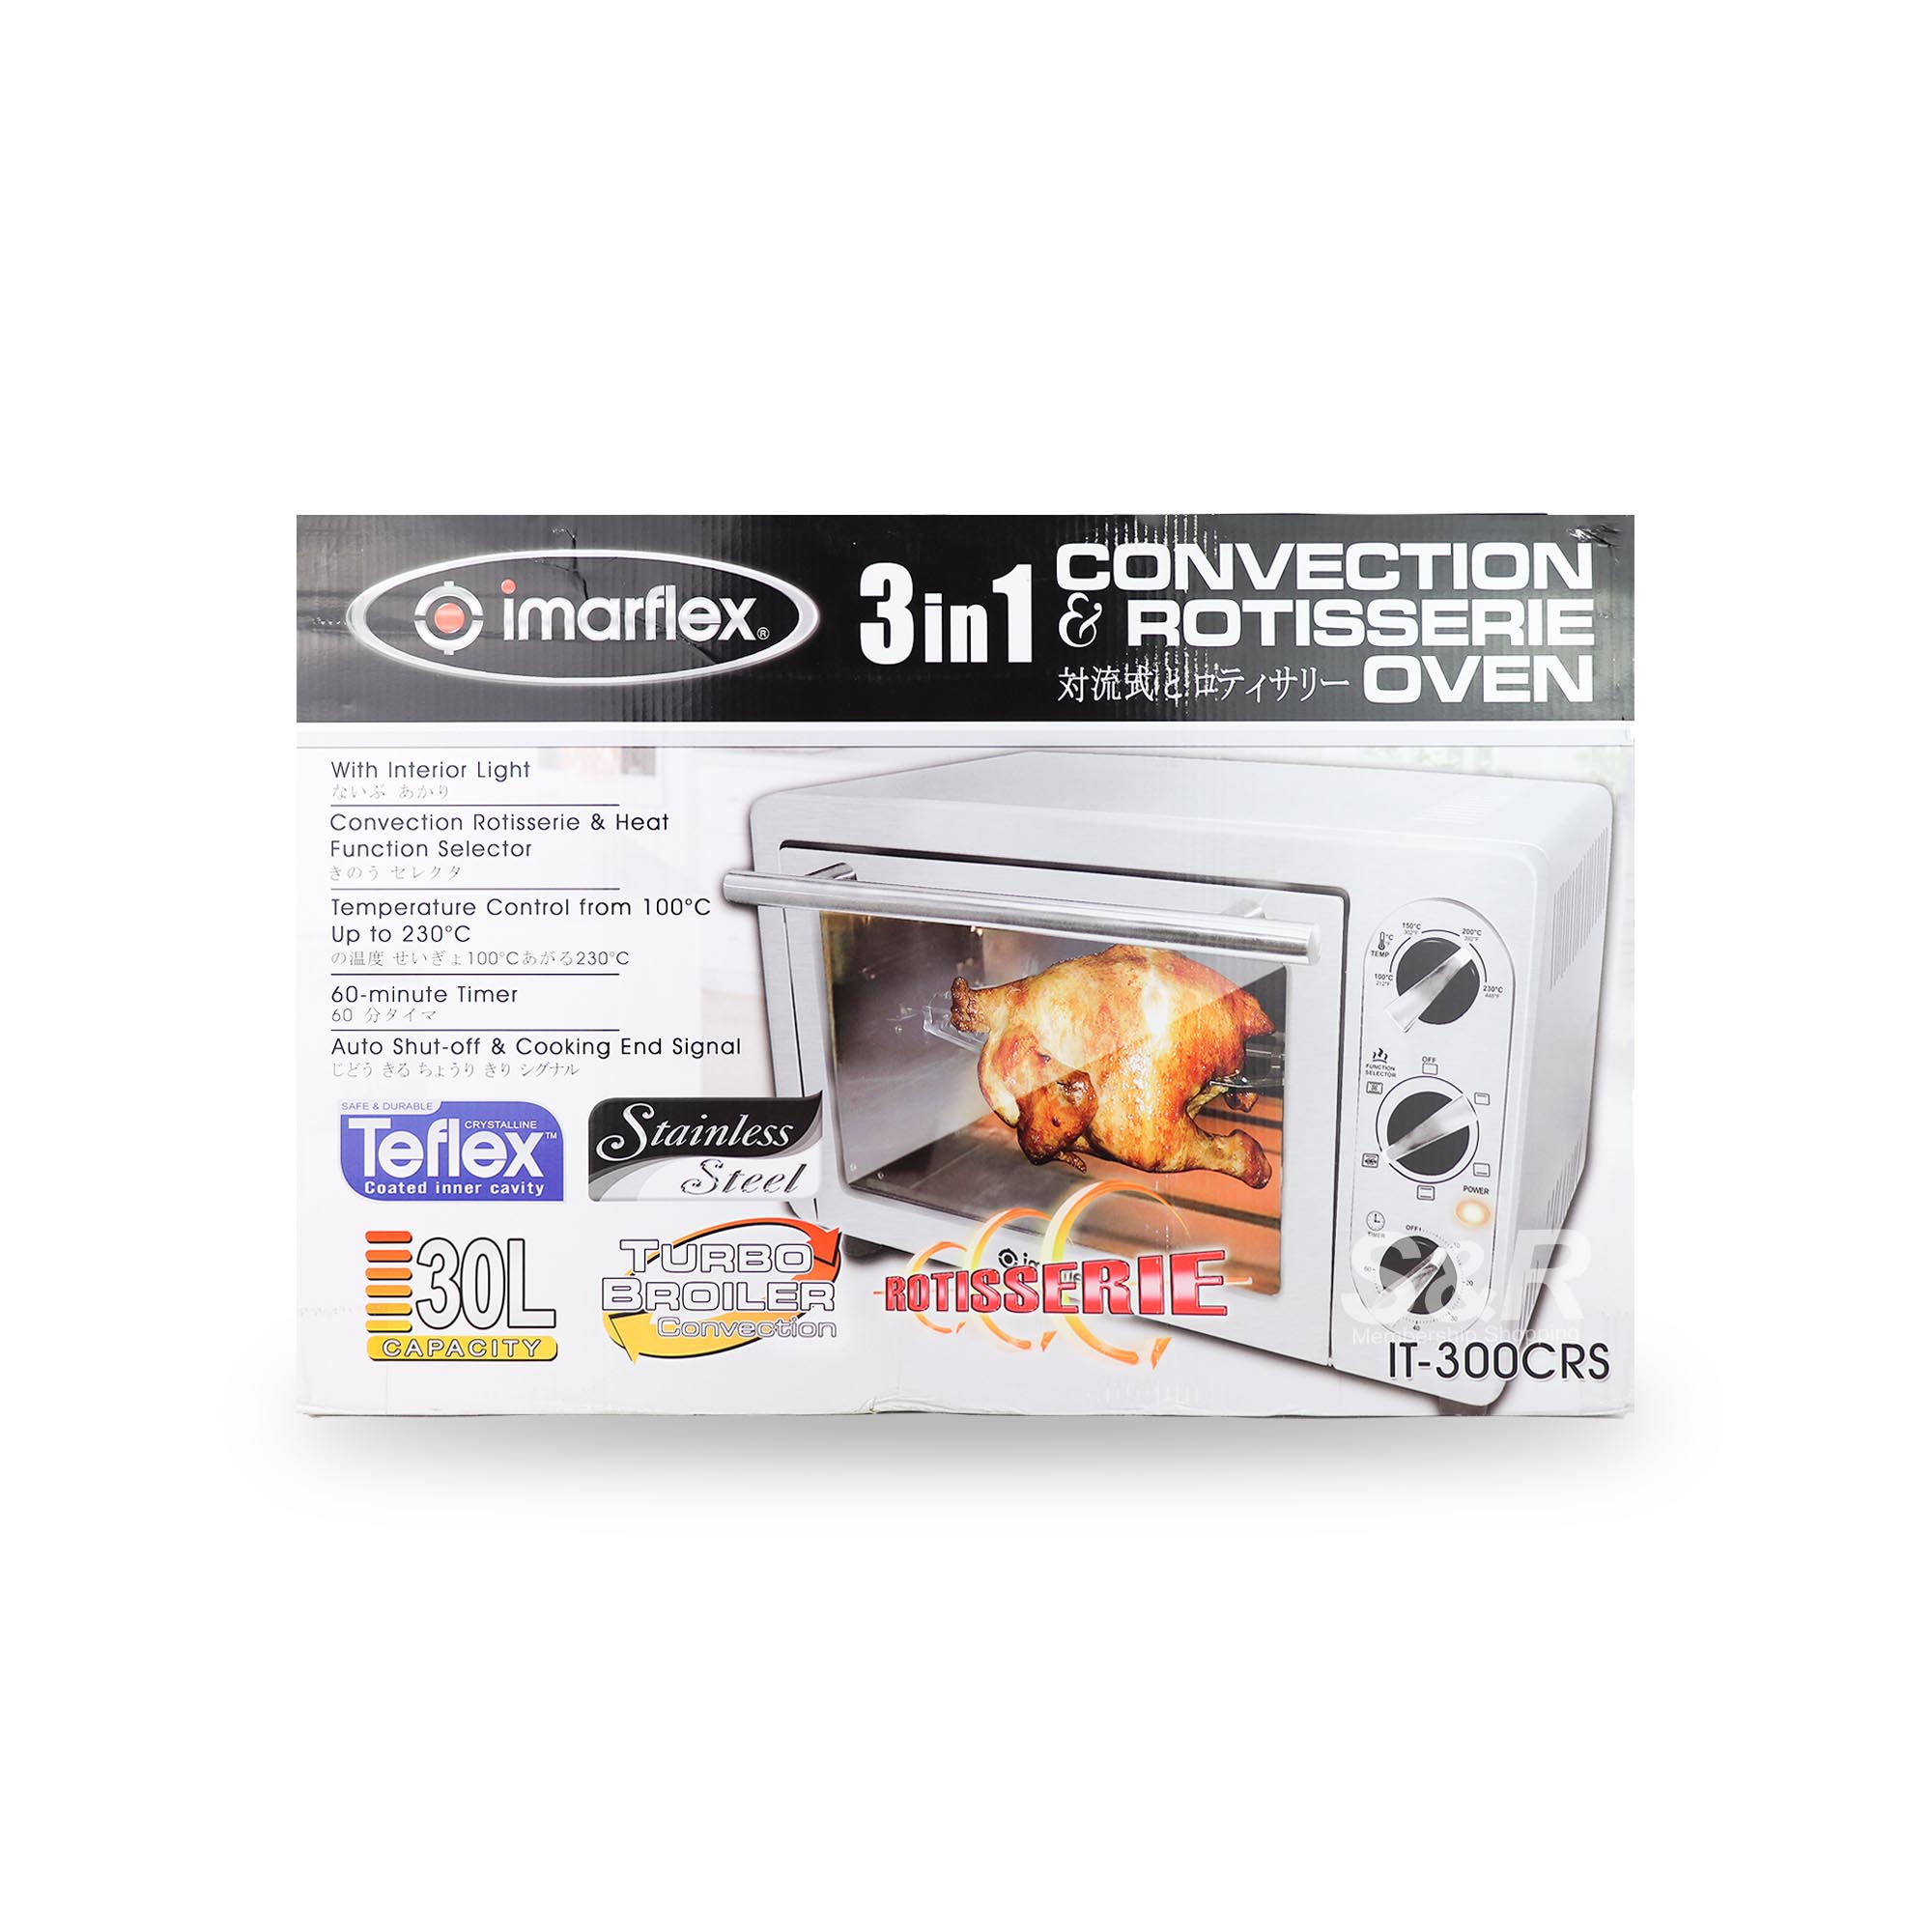 Imarflex 3 in 1 Convection & Rotisserie Oven IT-300CRS 1 box